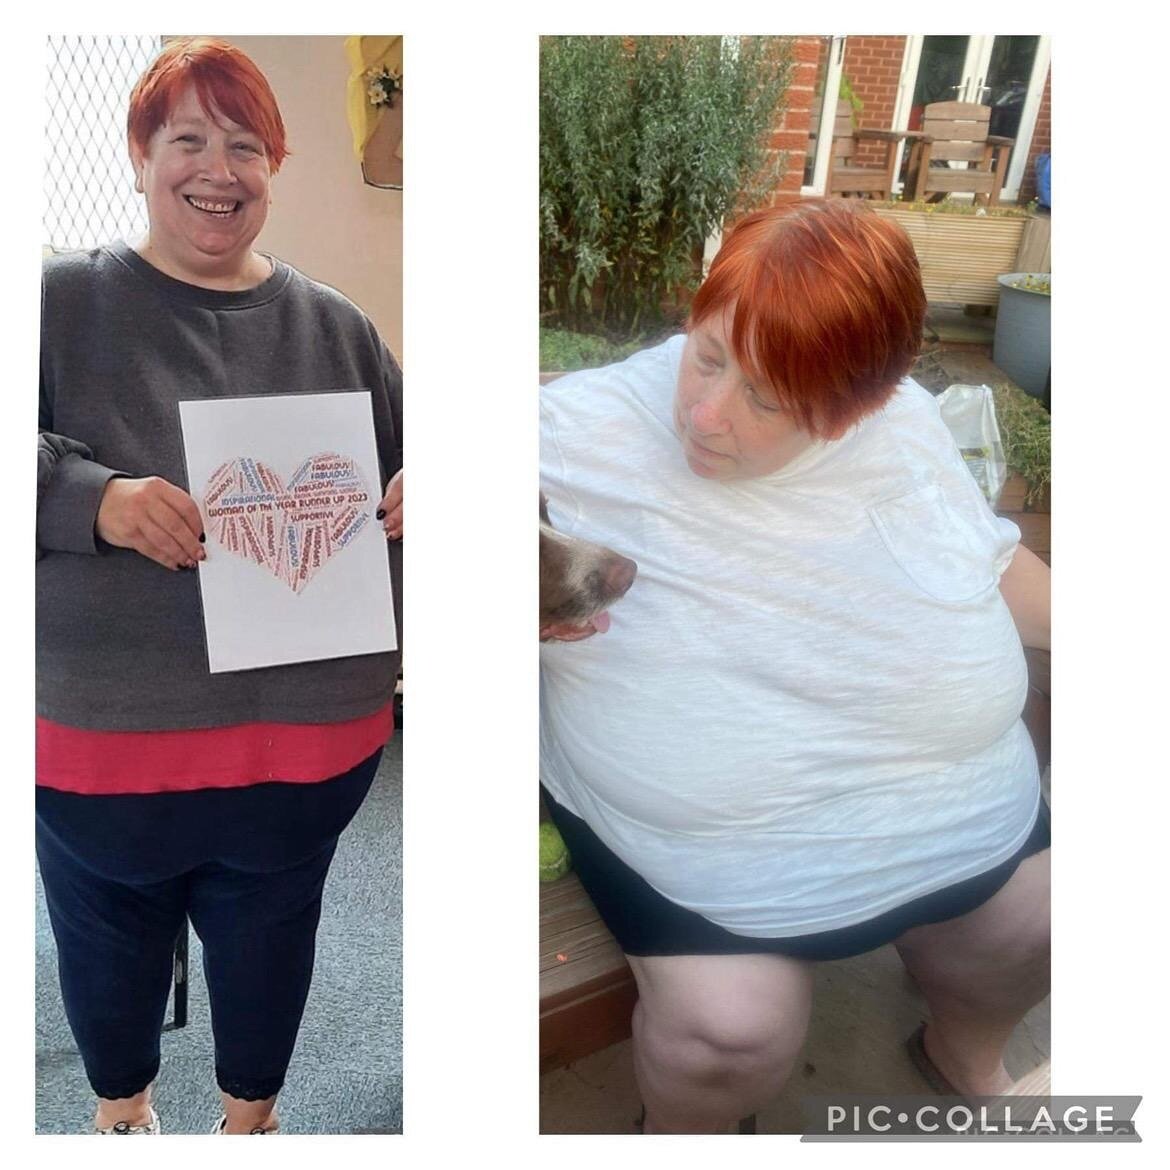 We would love to share Julie Brandricks success with you all. Julie has managed to drop 8 stone on her weight loss journey so far and is still going. From everyone here at fuse a massive well done and keep it up. 

Happy gyming 
Fuse team